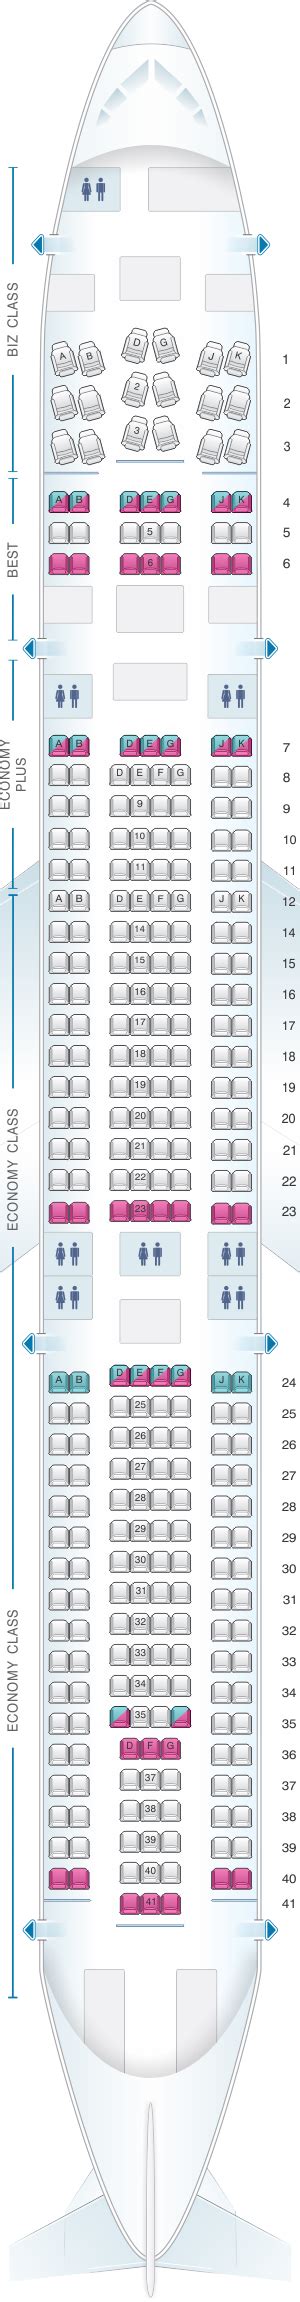 Airbus A330 343 Seat Map Lufthansa Elcho Table